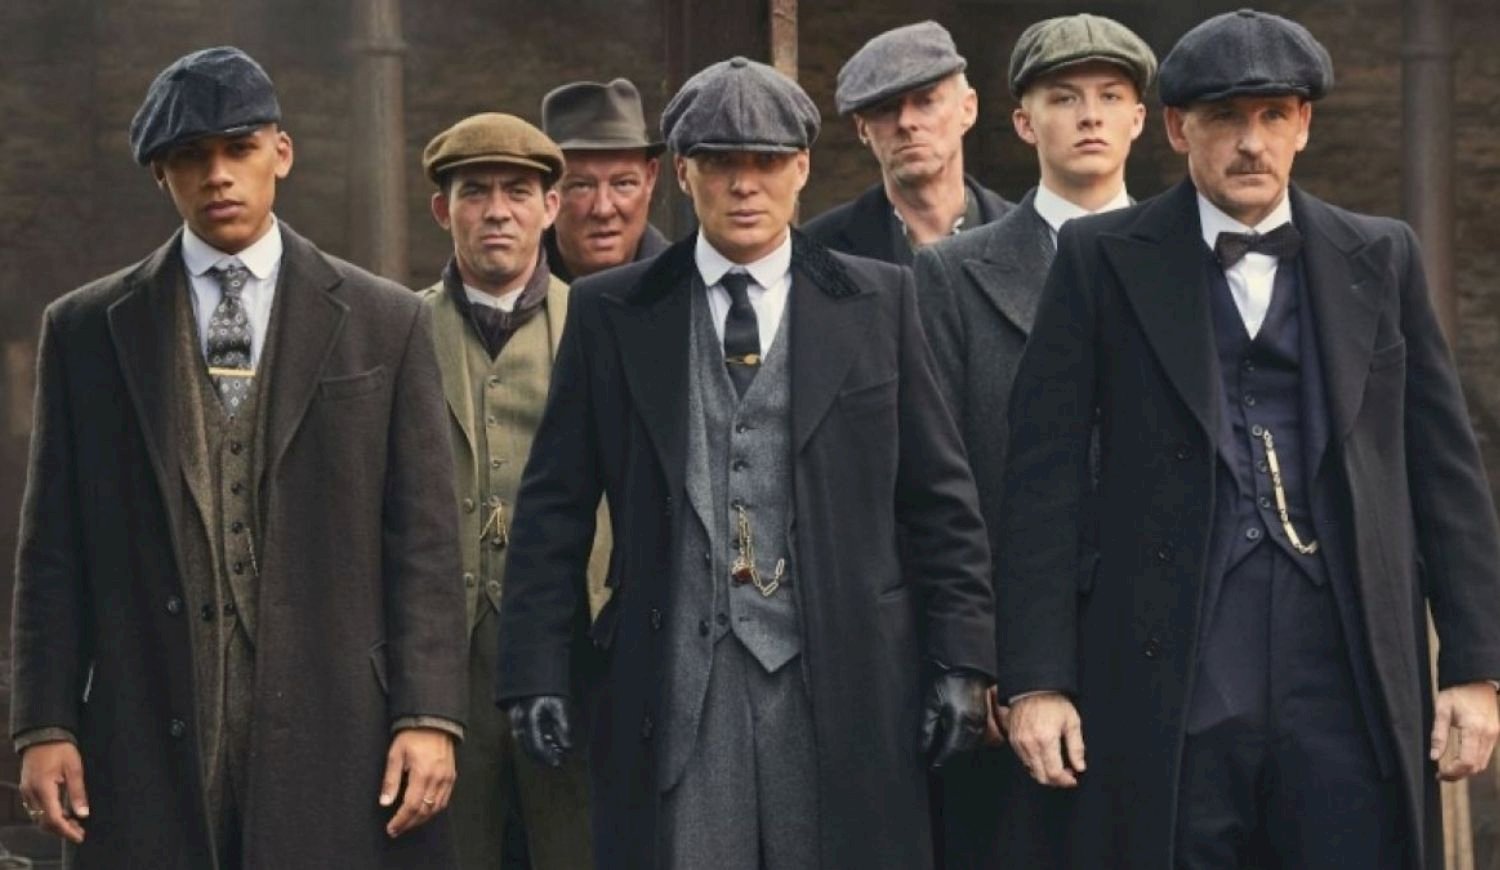 When does the new season of ‘Peaky Blinders’ premiere on Netflix?